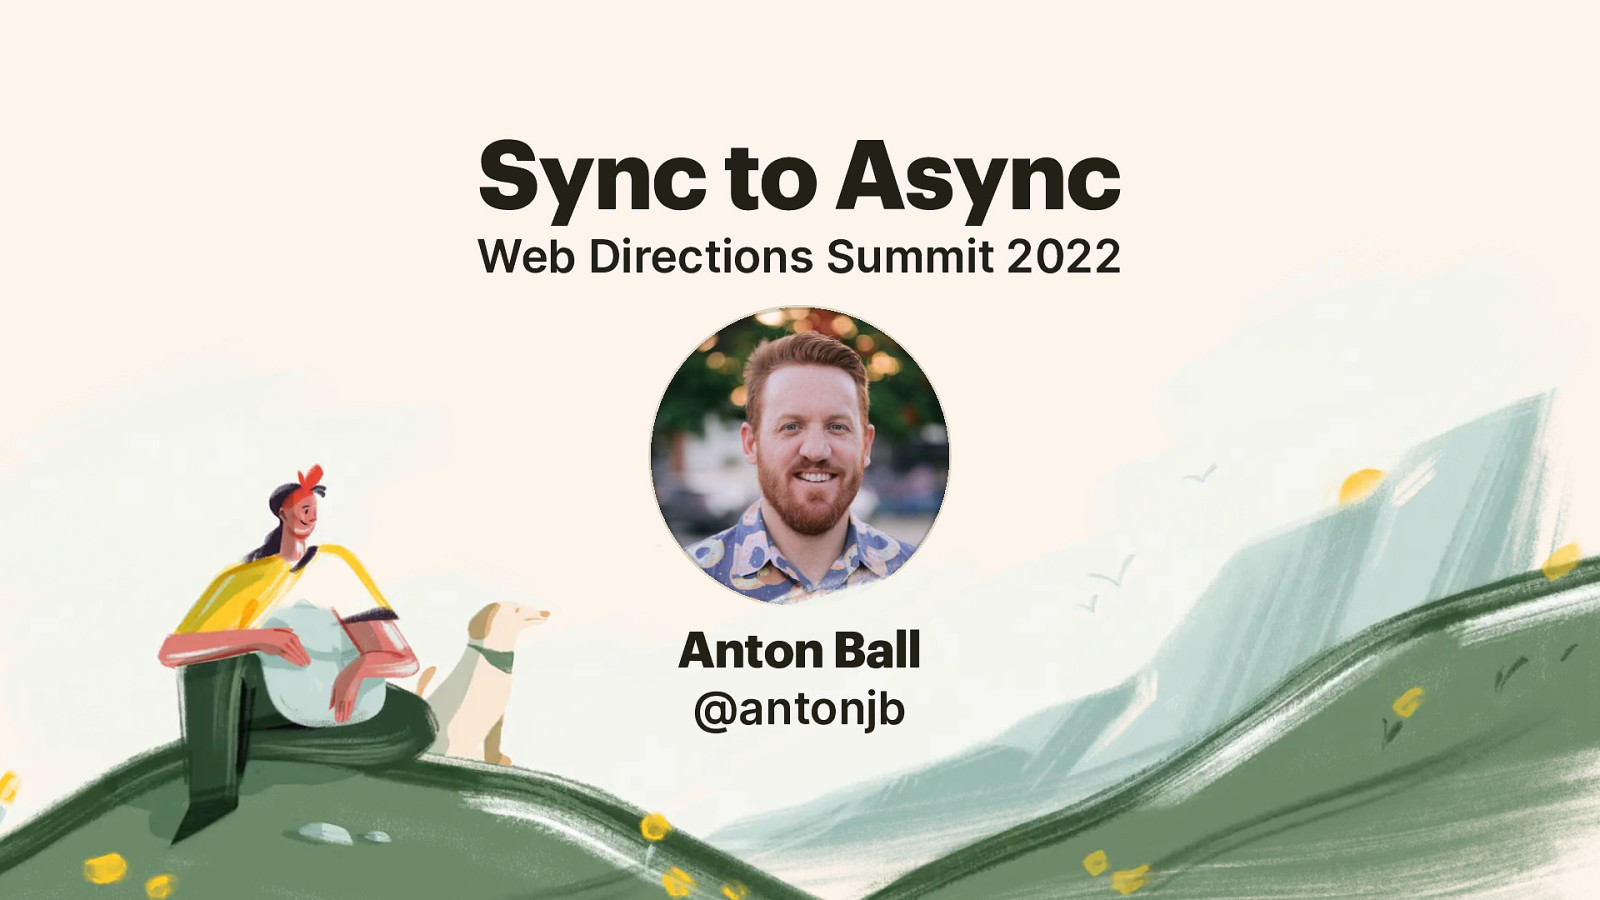 SYNC TO ASYNC - ADJUSTING TO THE NEW WORK STYLE